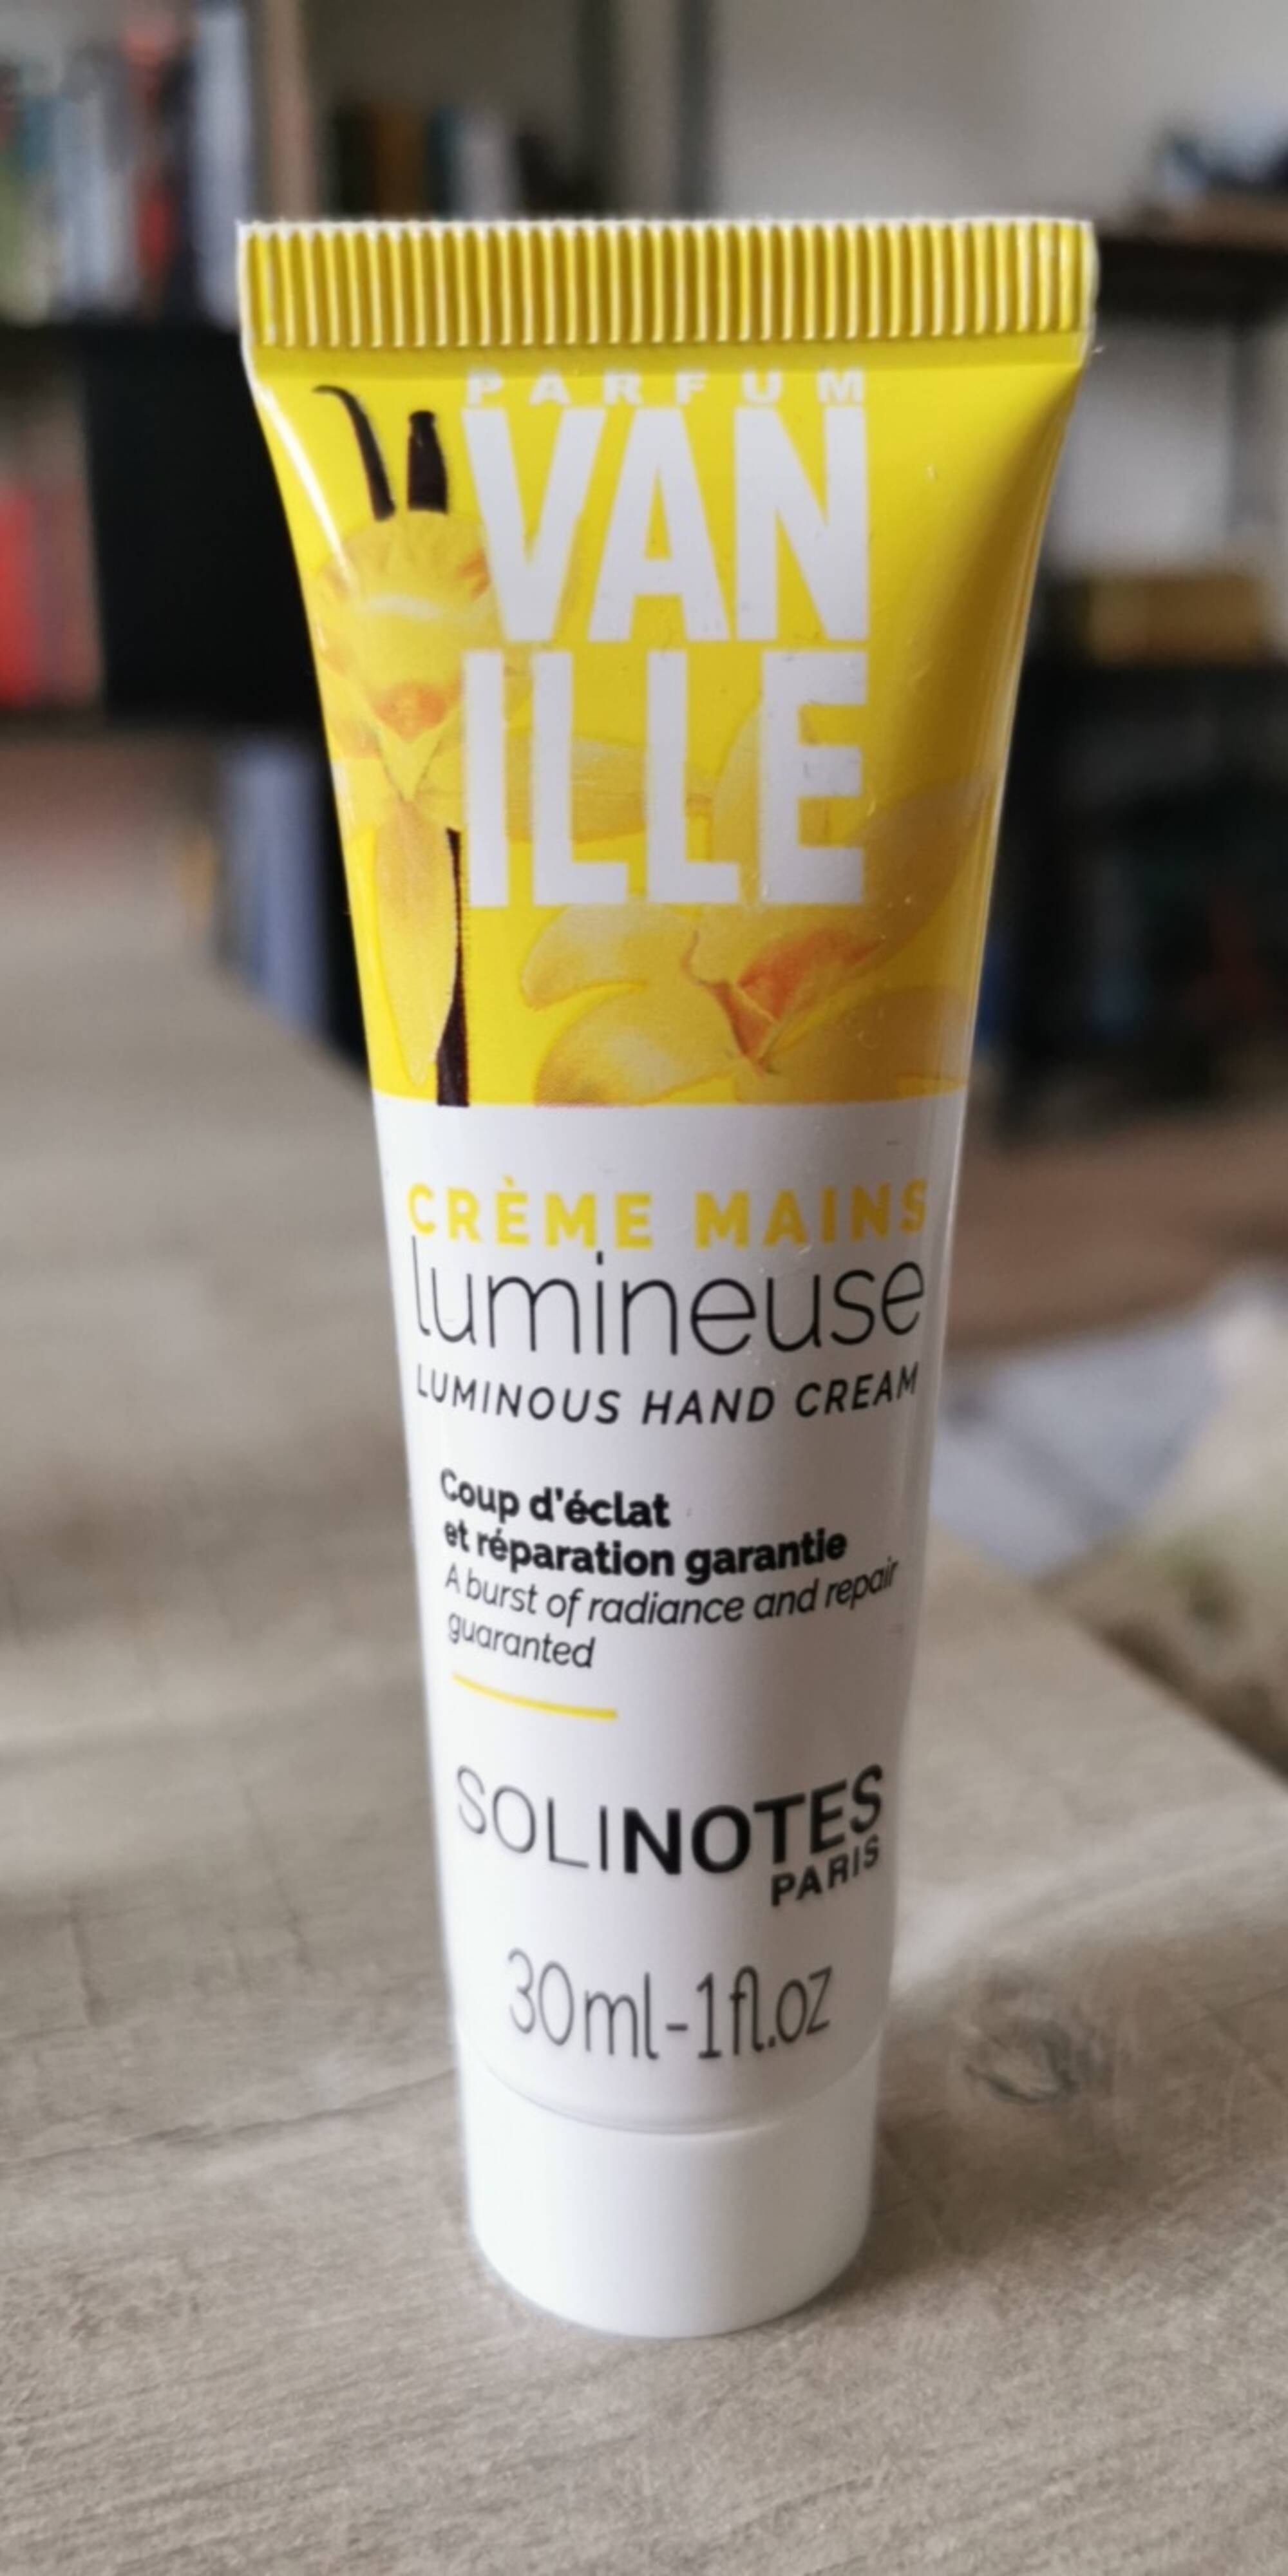 SOLINOTES - Vanille - Crème mains lumineuse